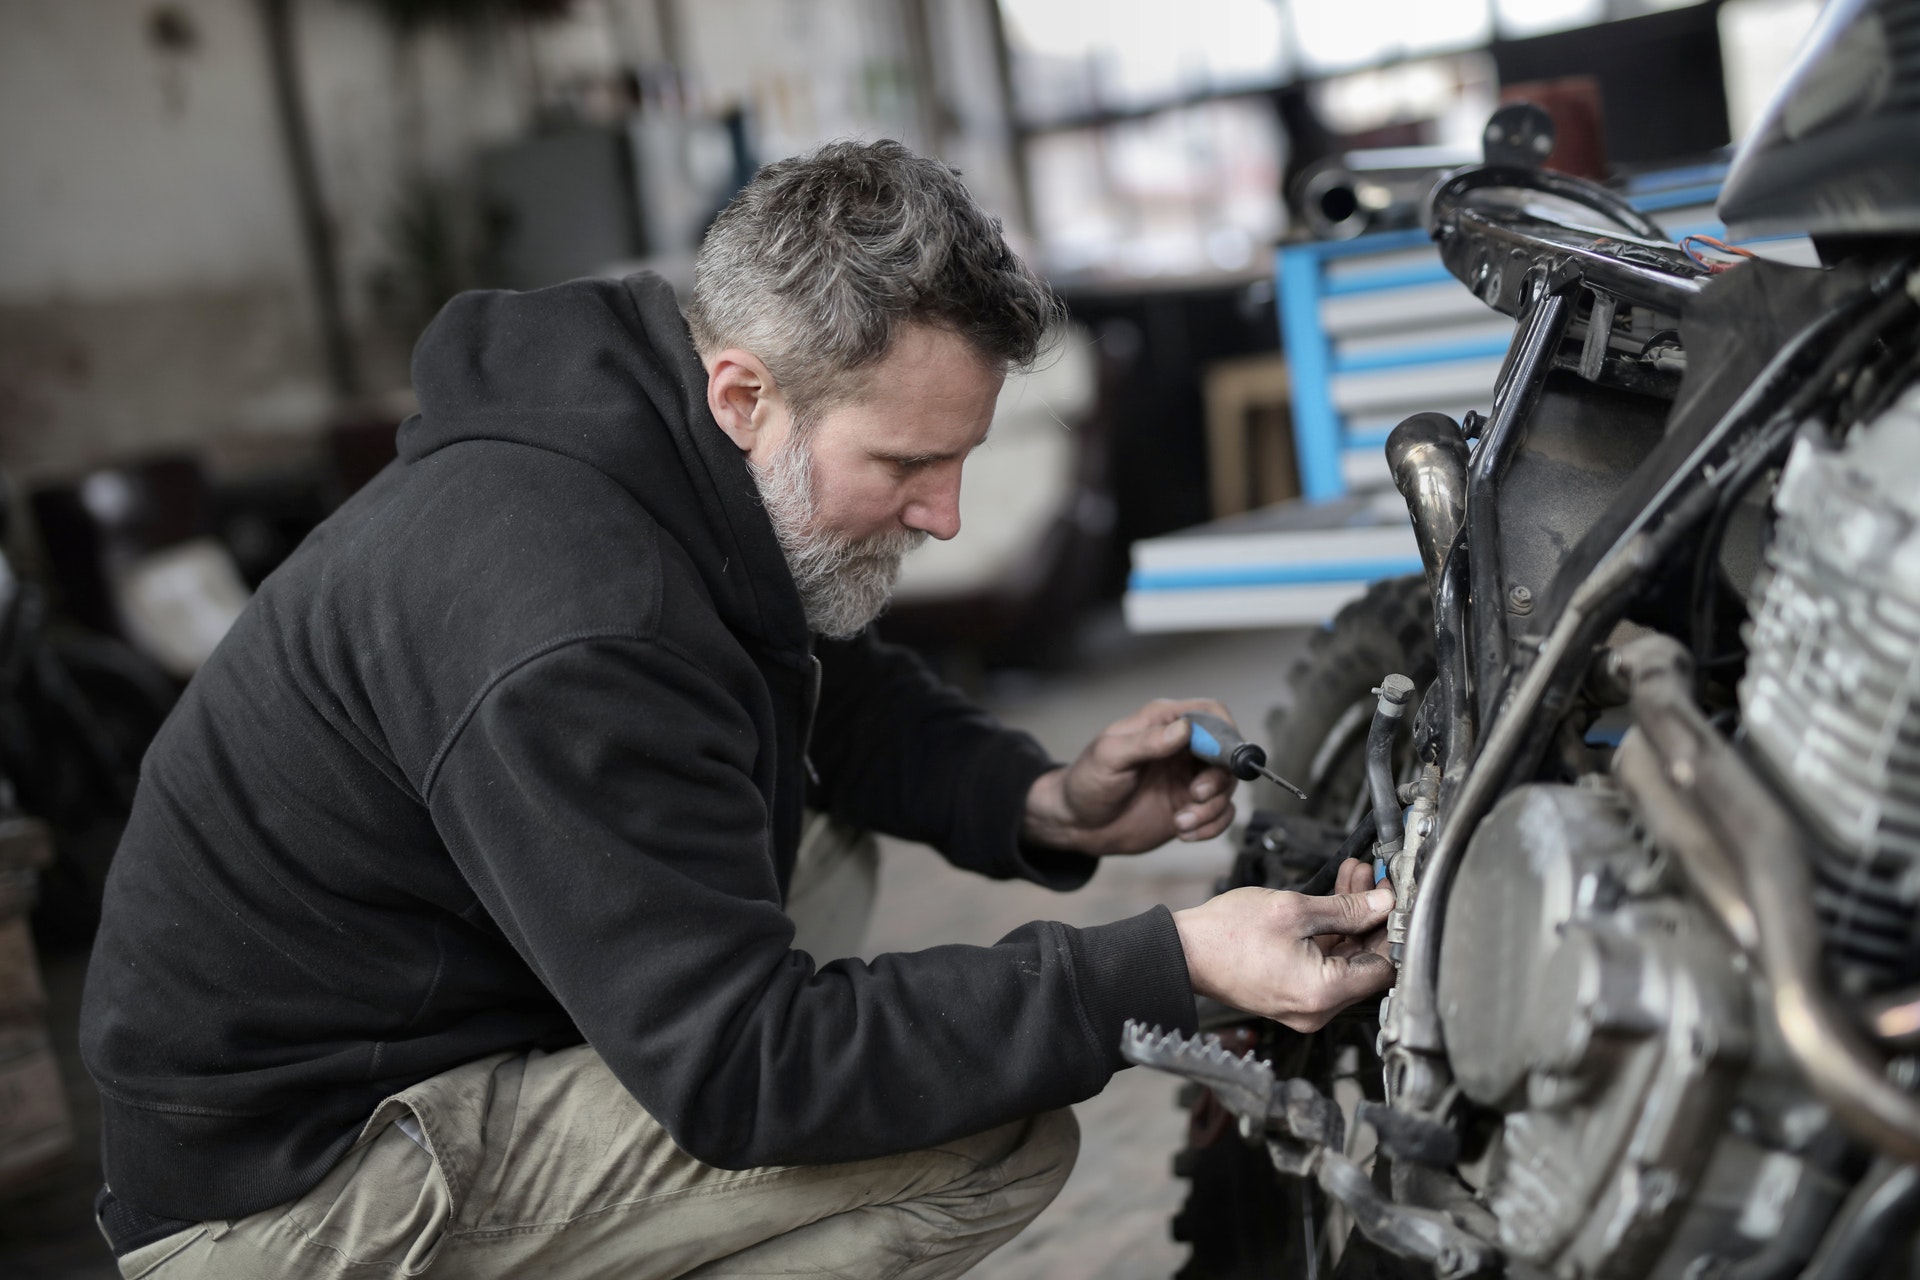 Bearded man removing motorcycle tire